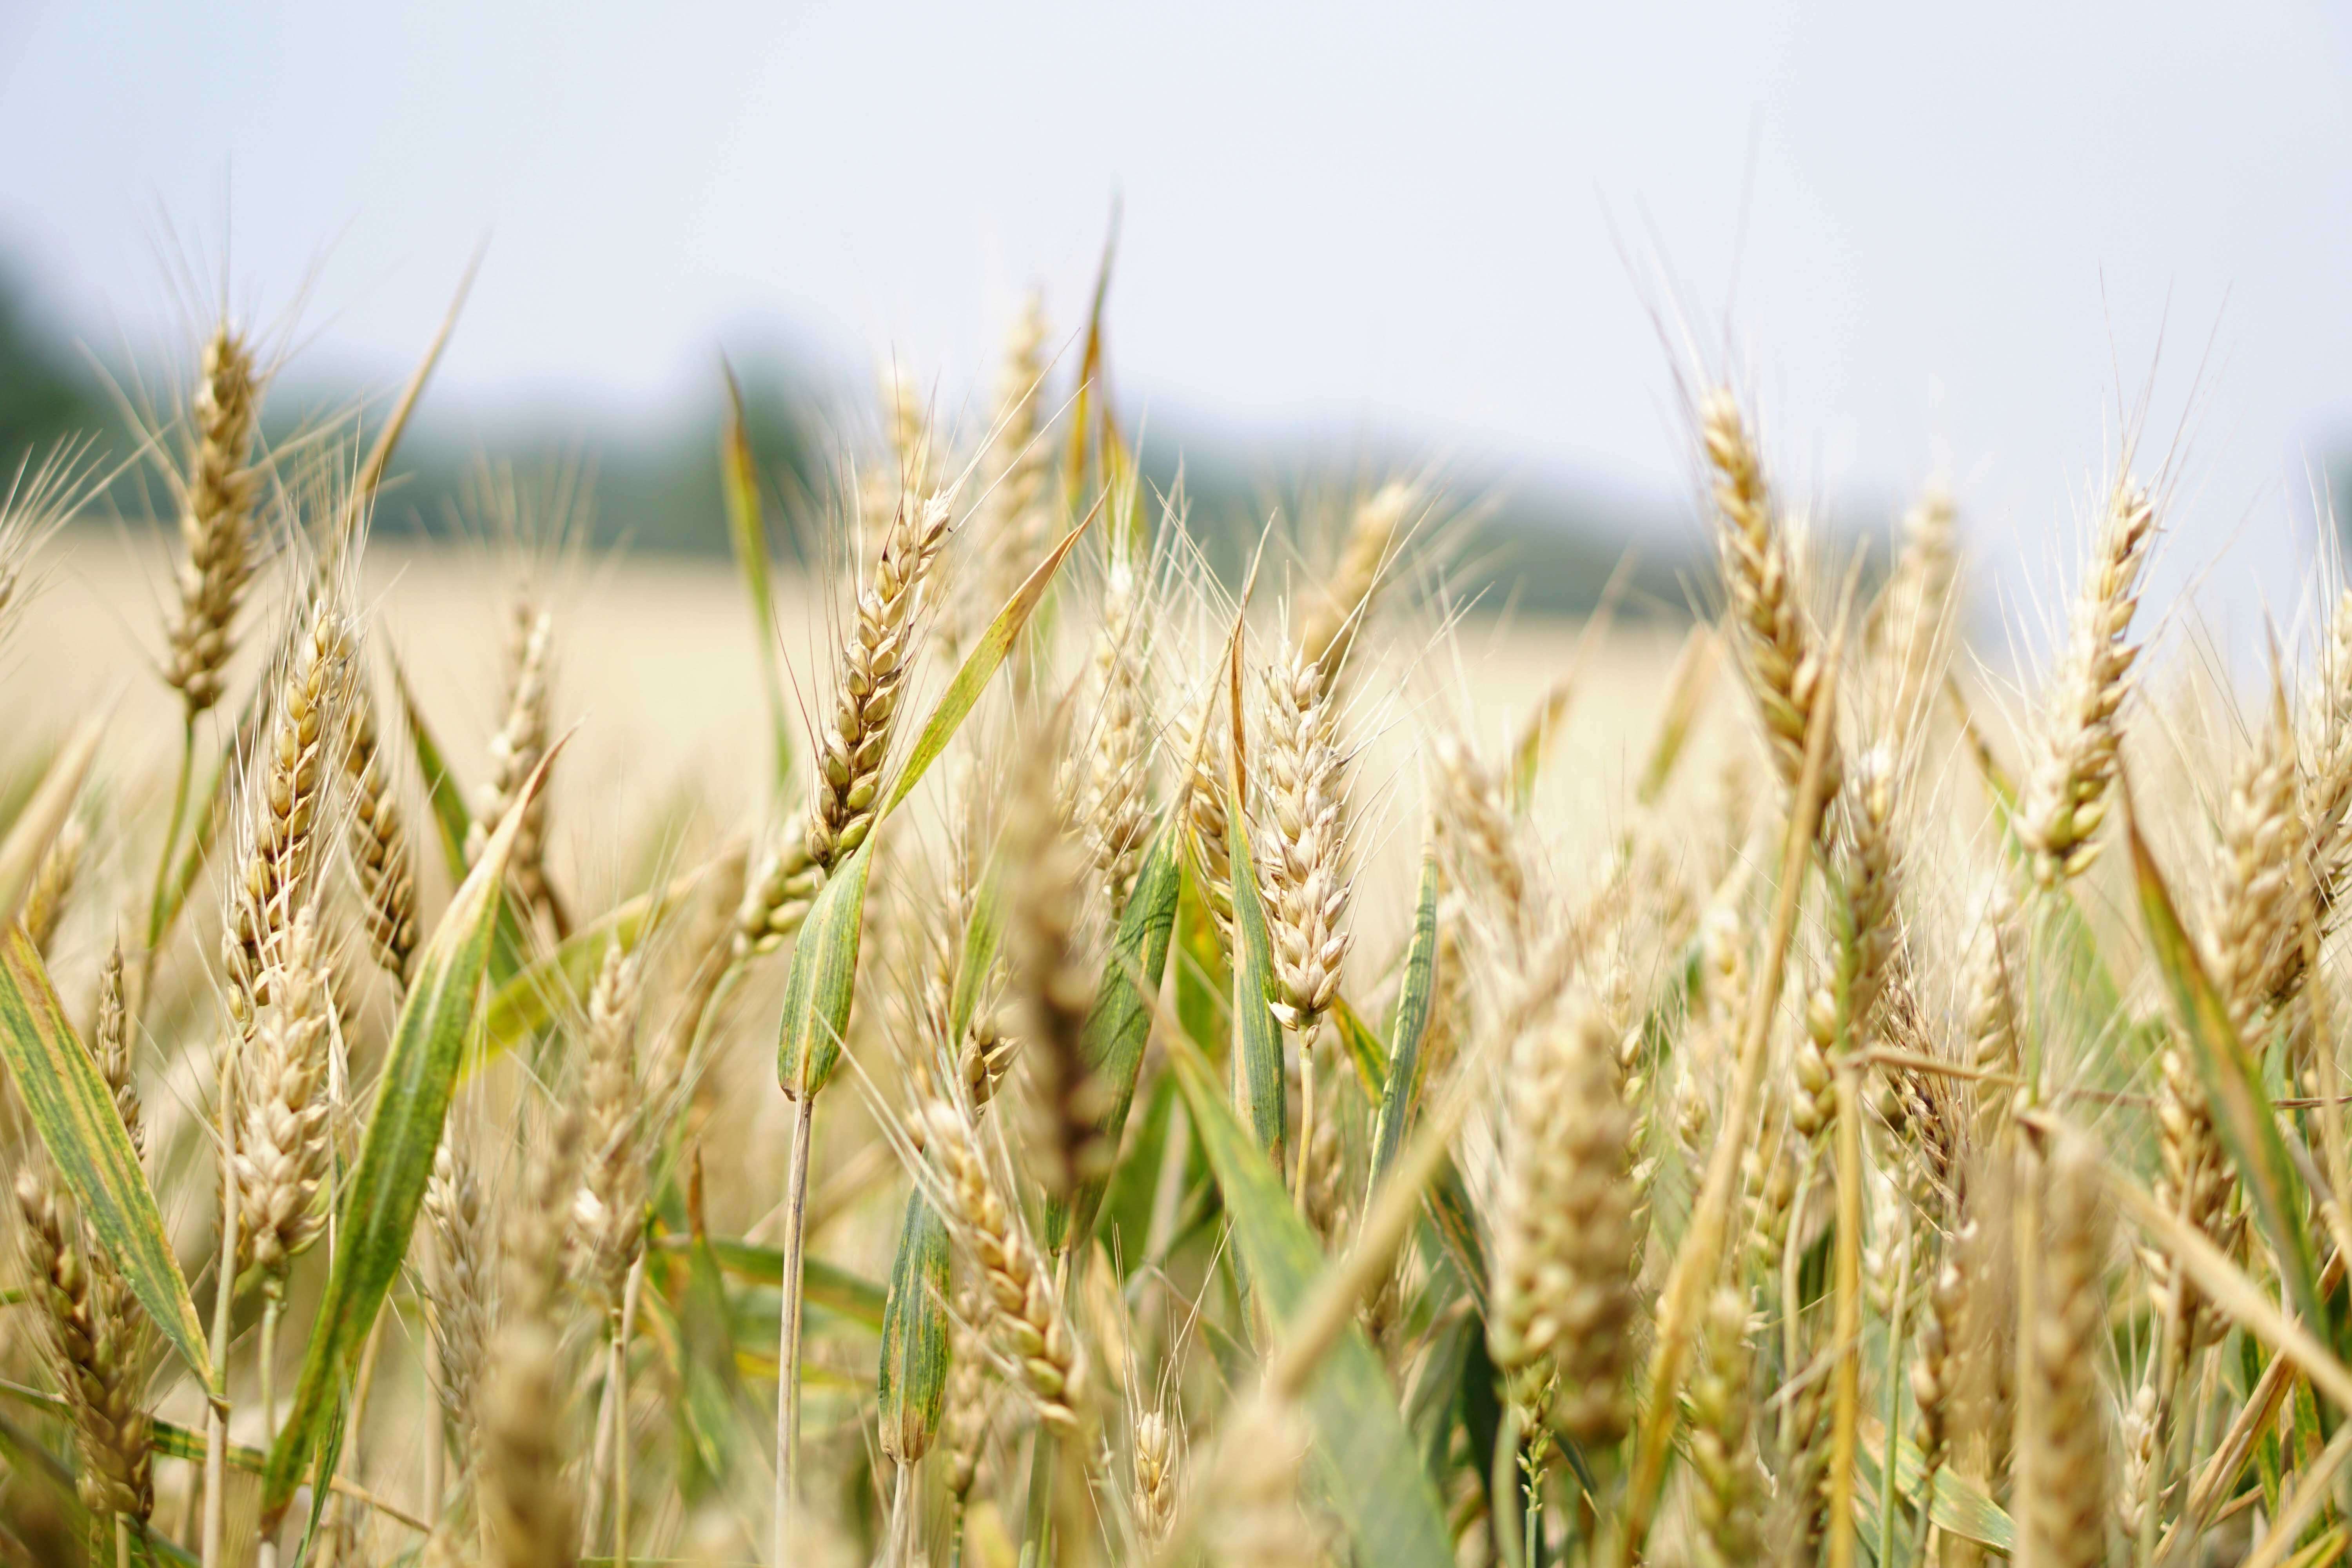 The Healthy Grain that is Making us Sick